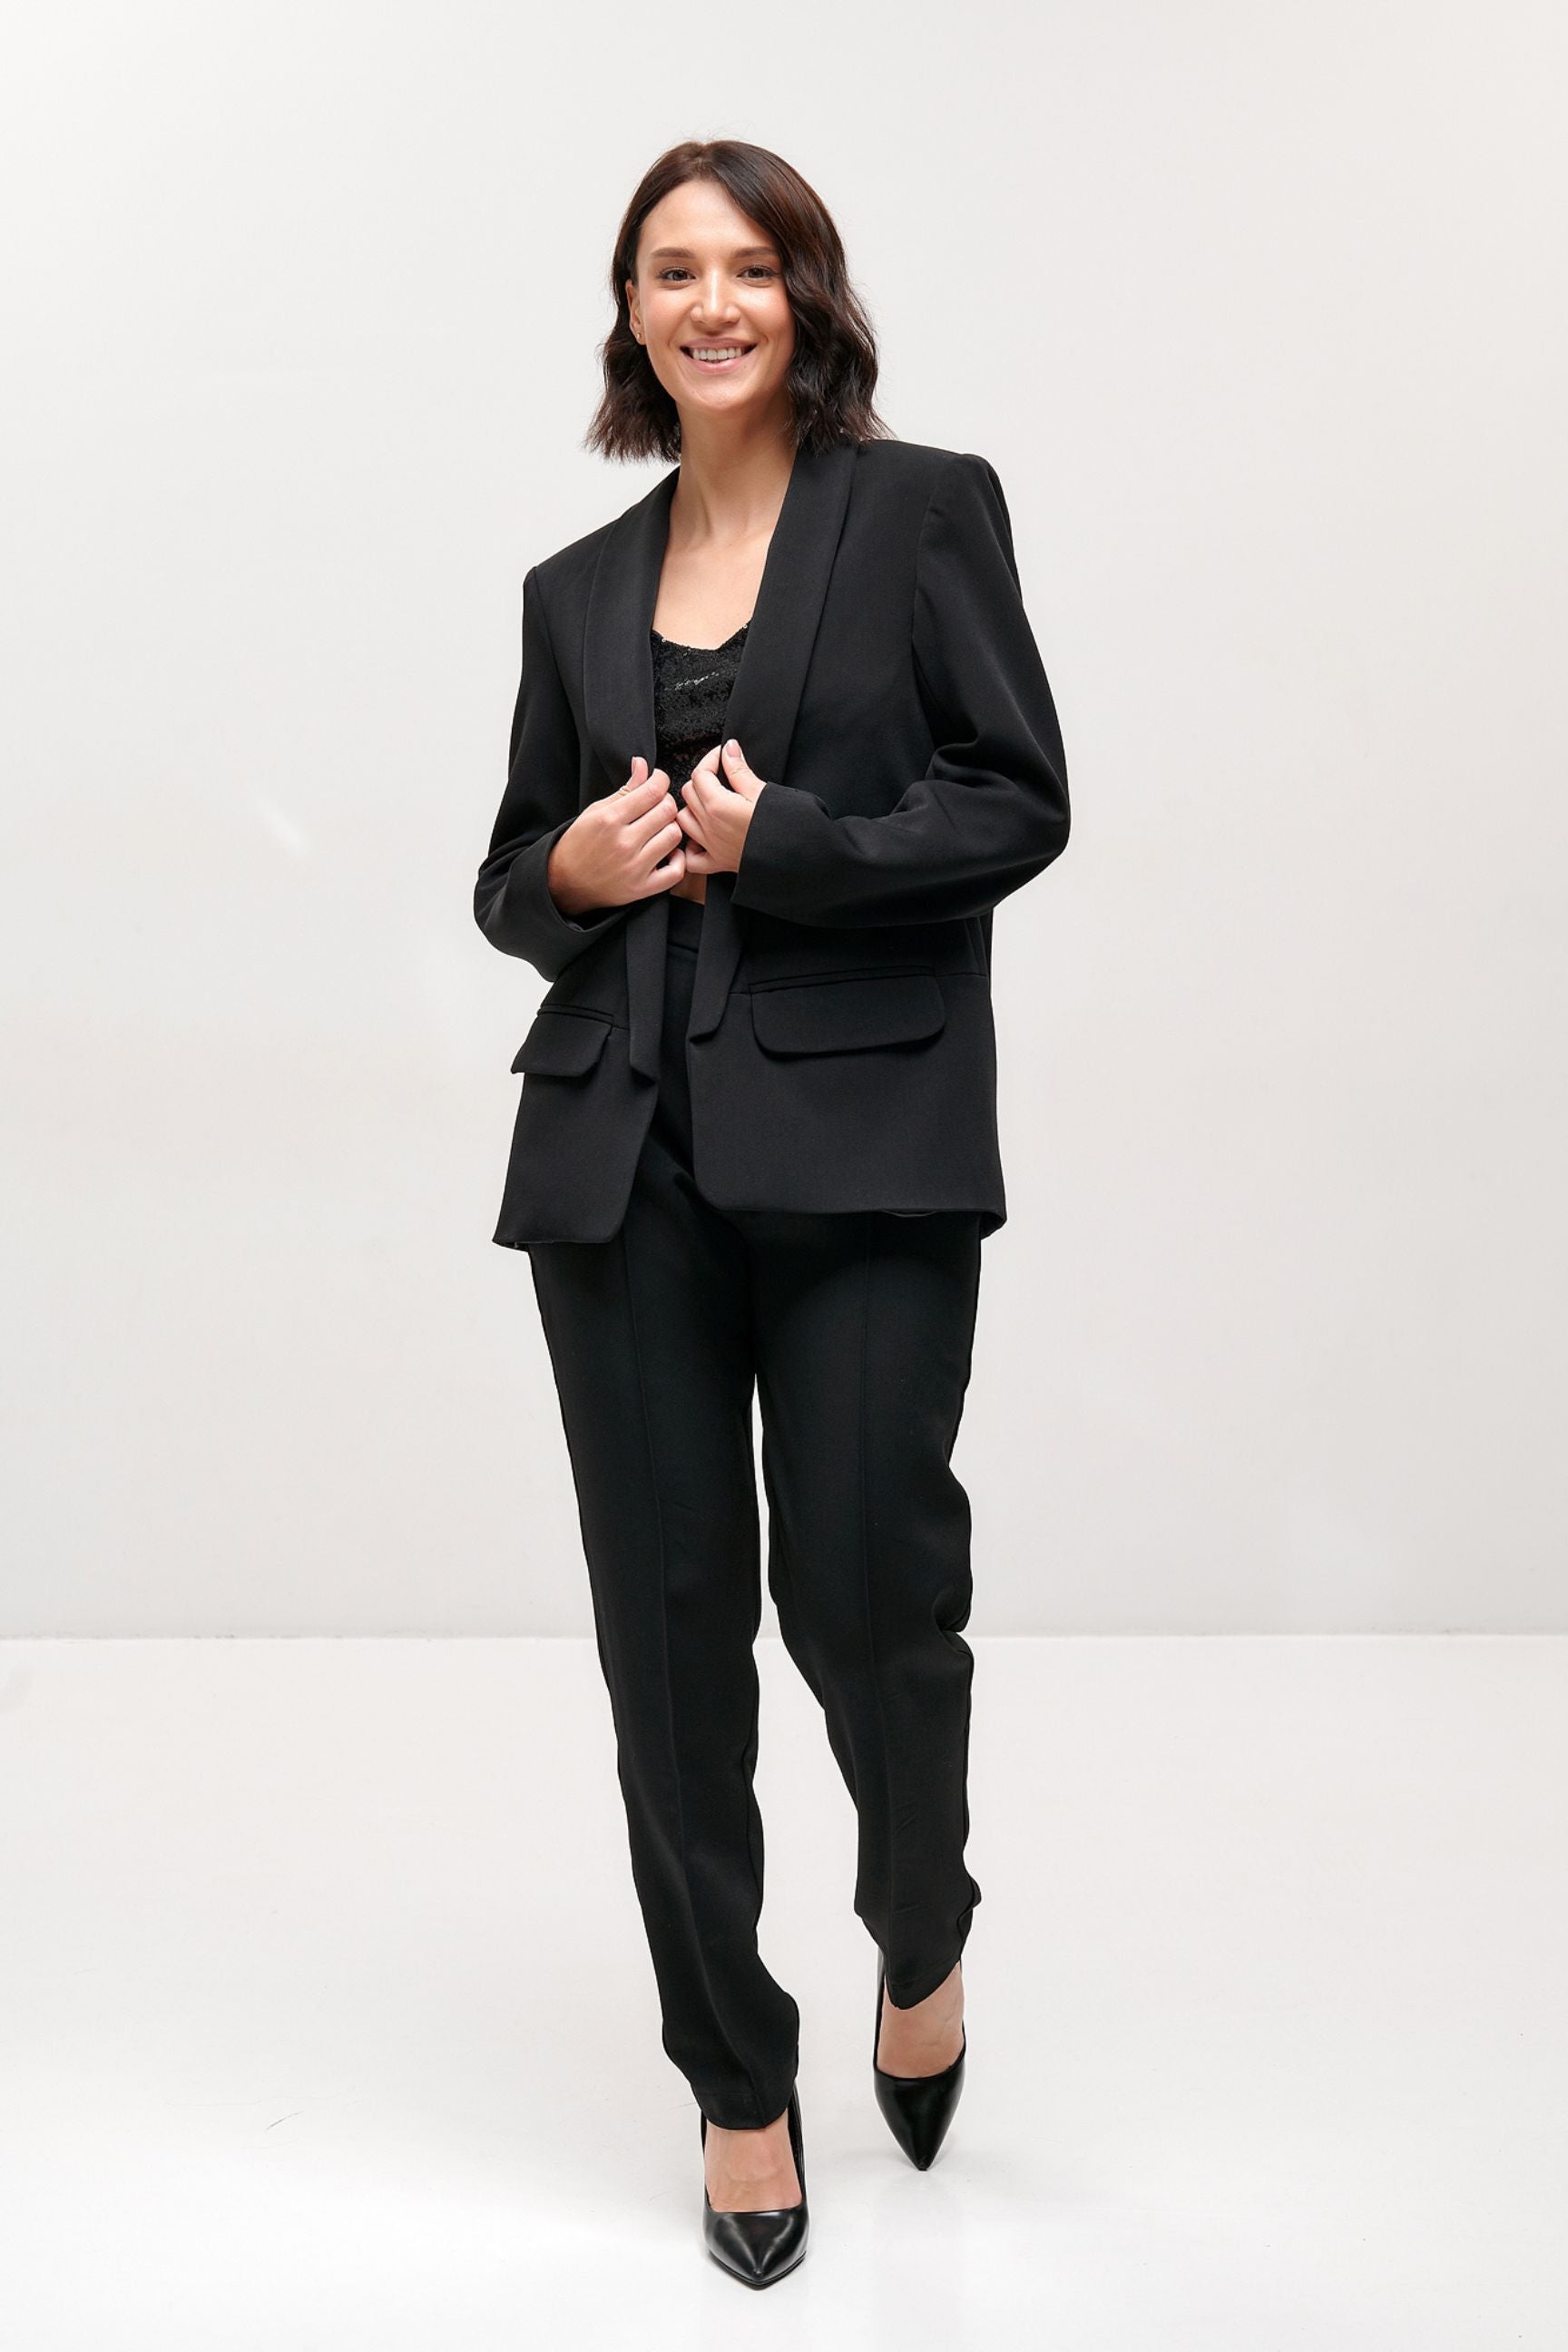 Black Open Blazer Jacket for Women without Buttons